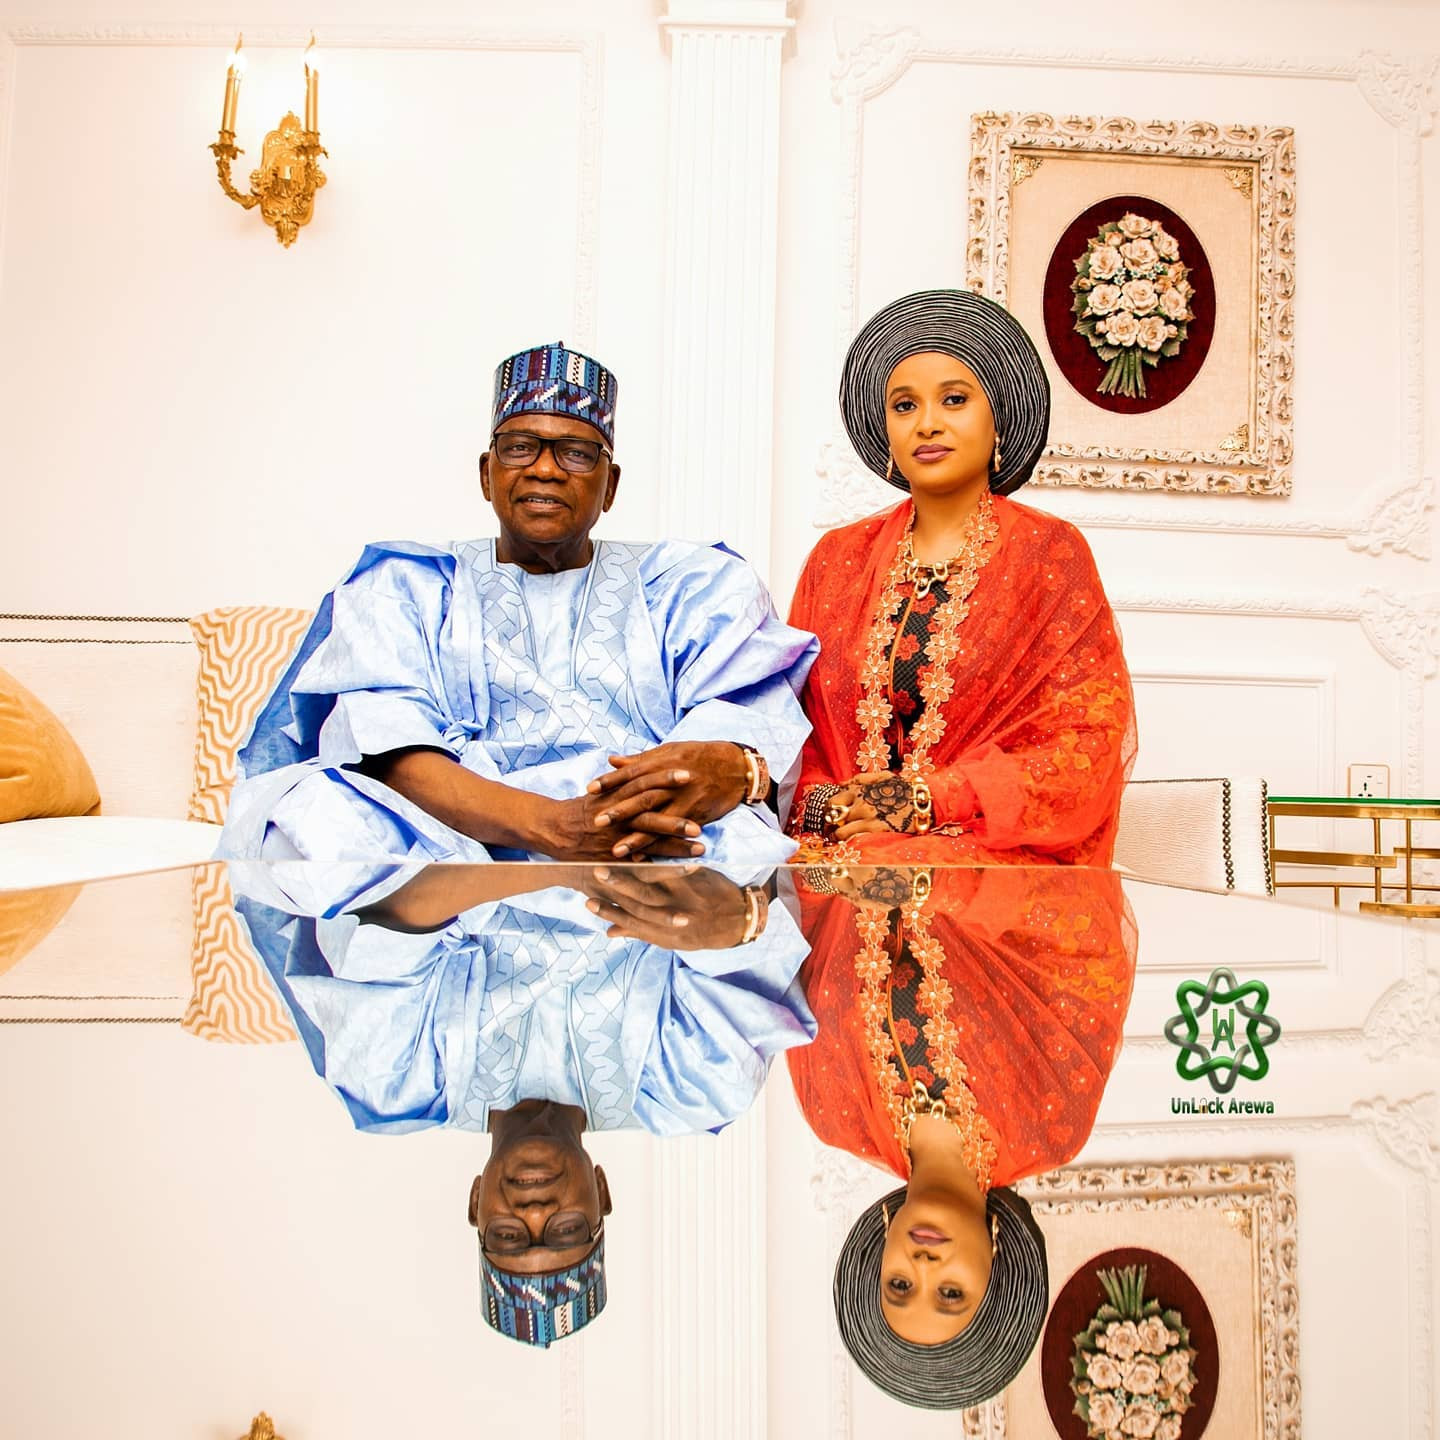 Goje marries beautiful lady after death of his wife